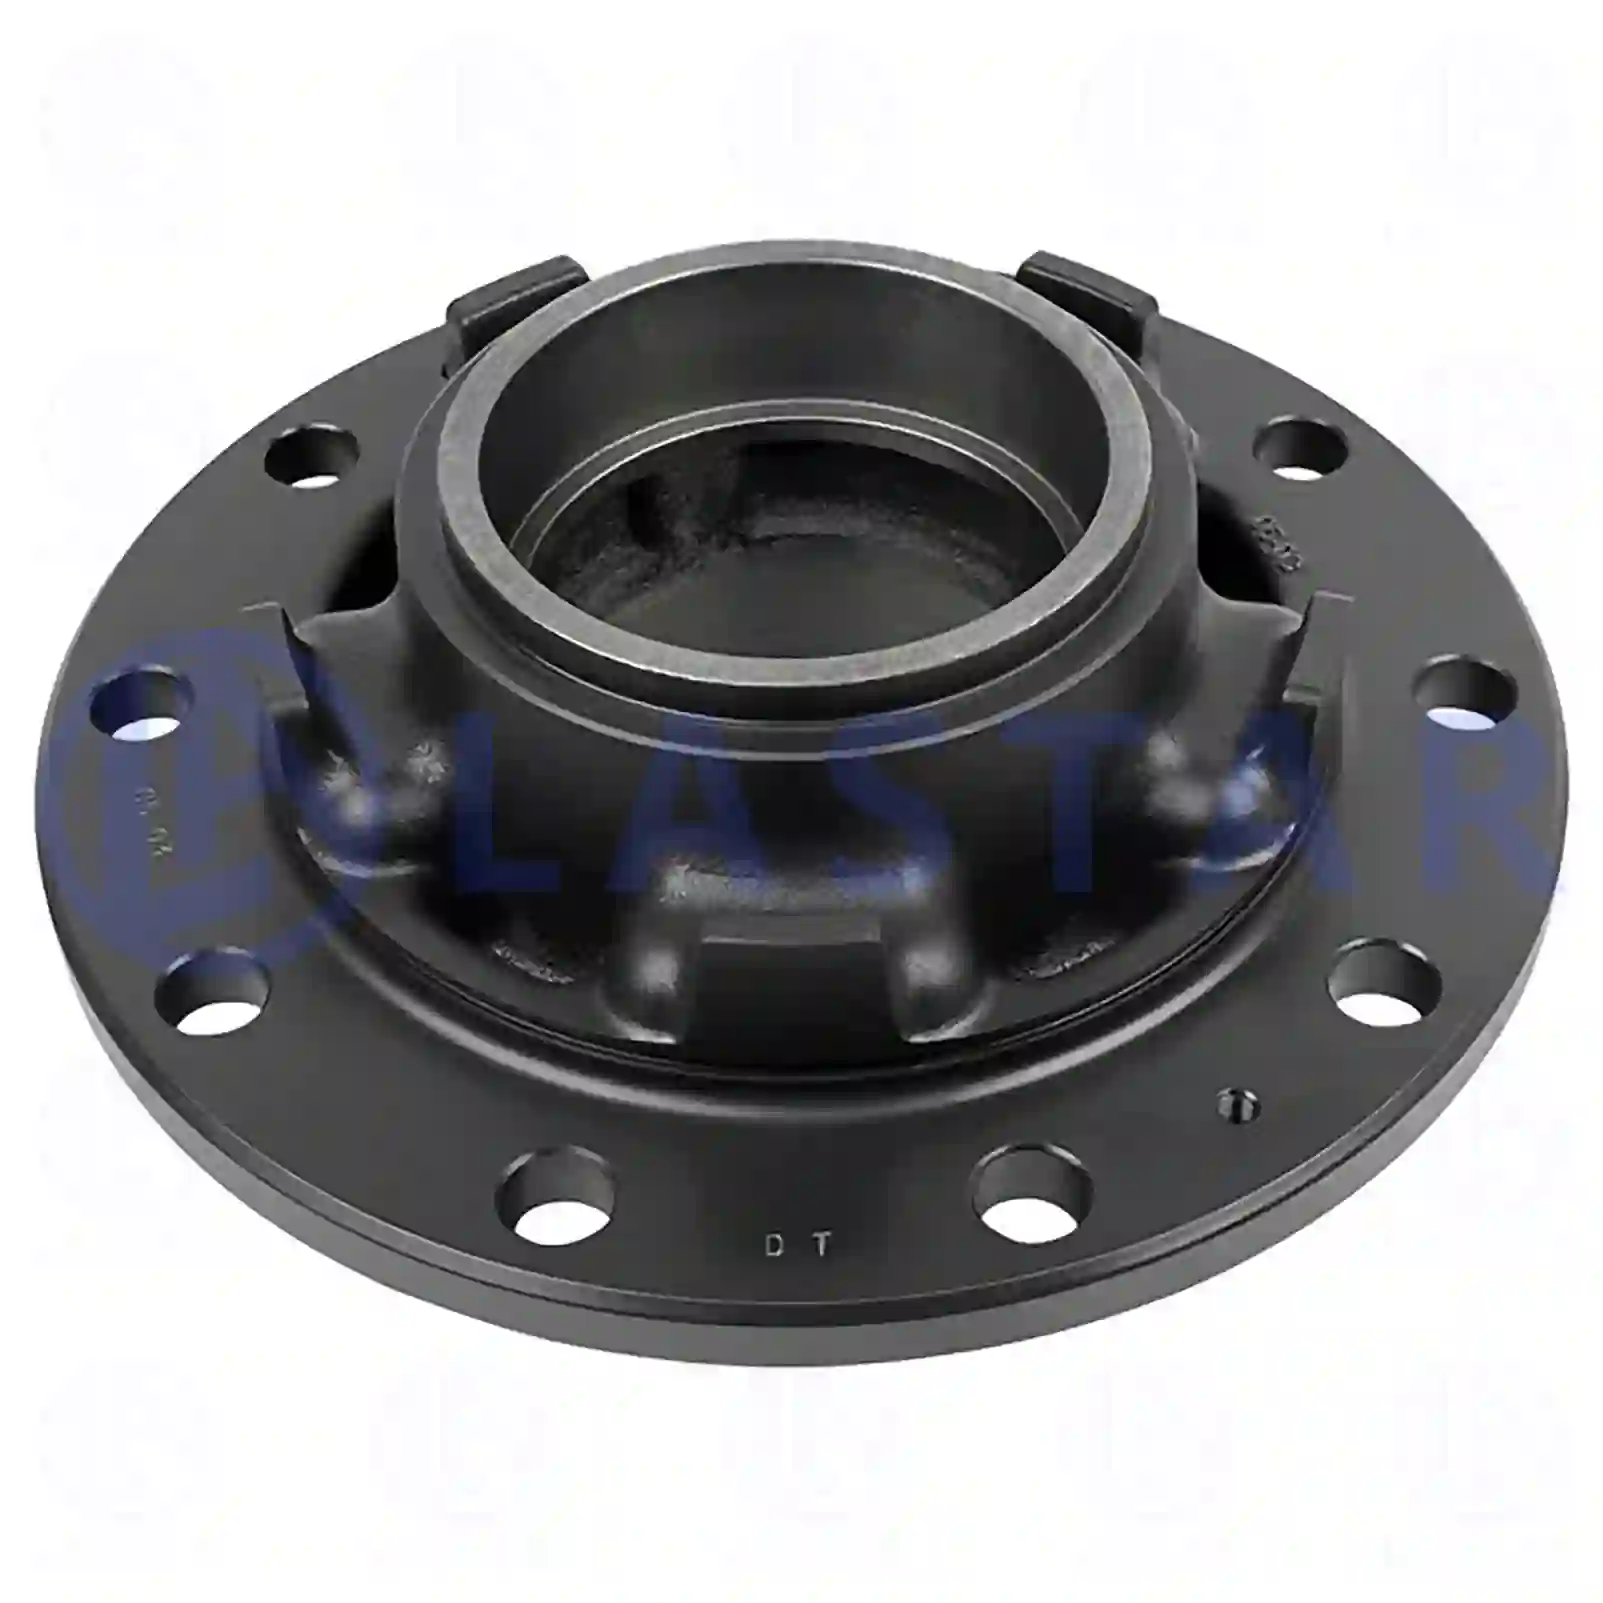  Wheel hub, without bearings || Lastar Spare Part | Truck Spare Parts, Auotomotive Spare Parts